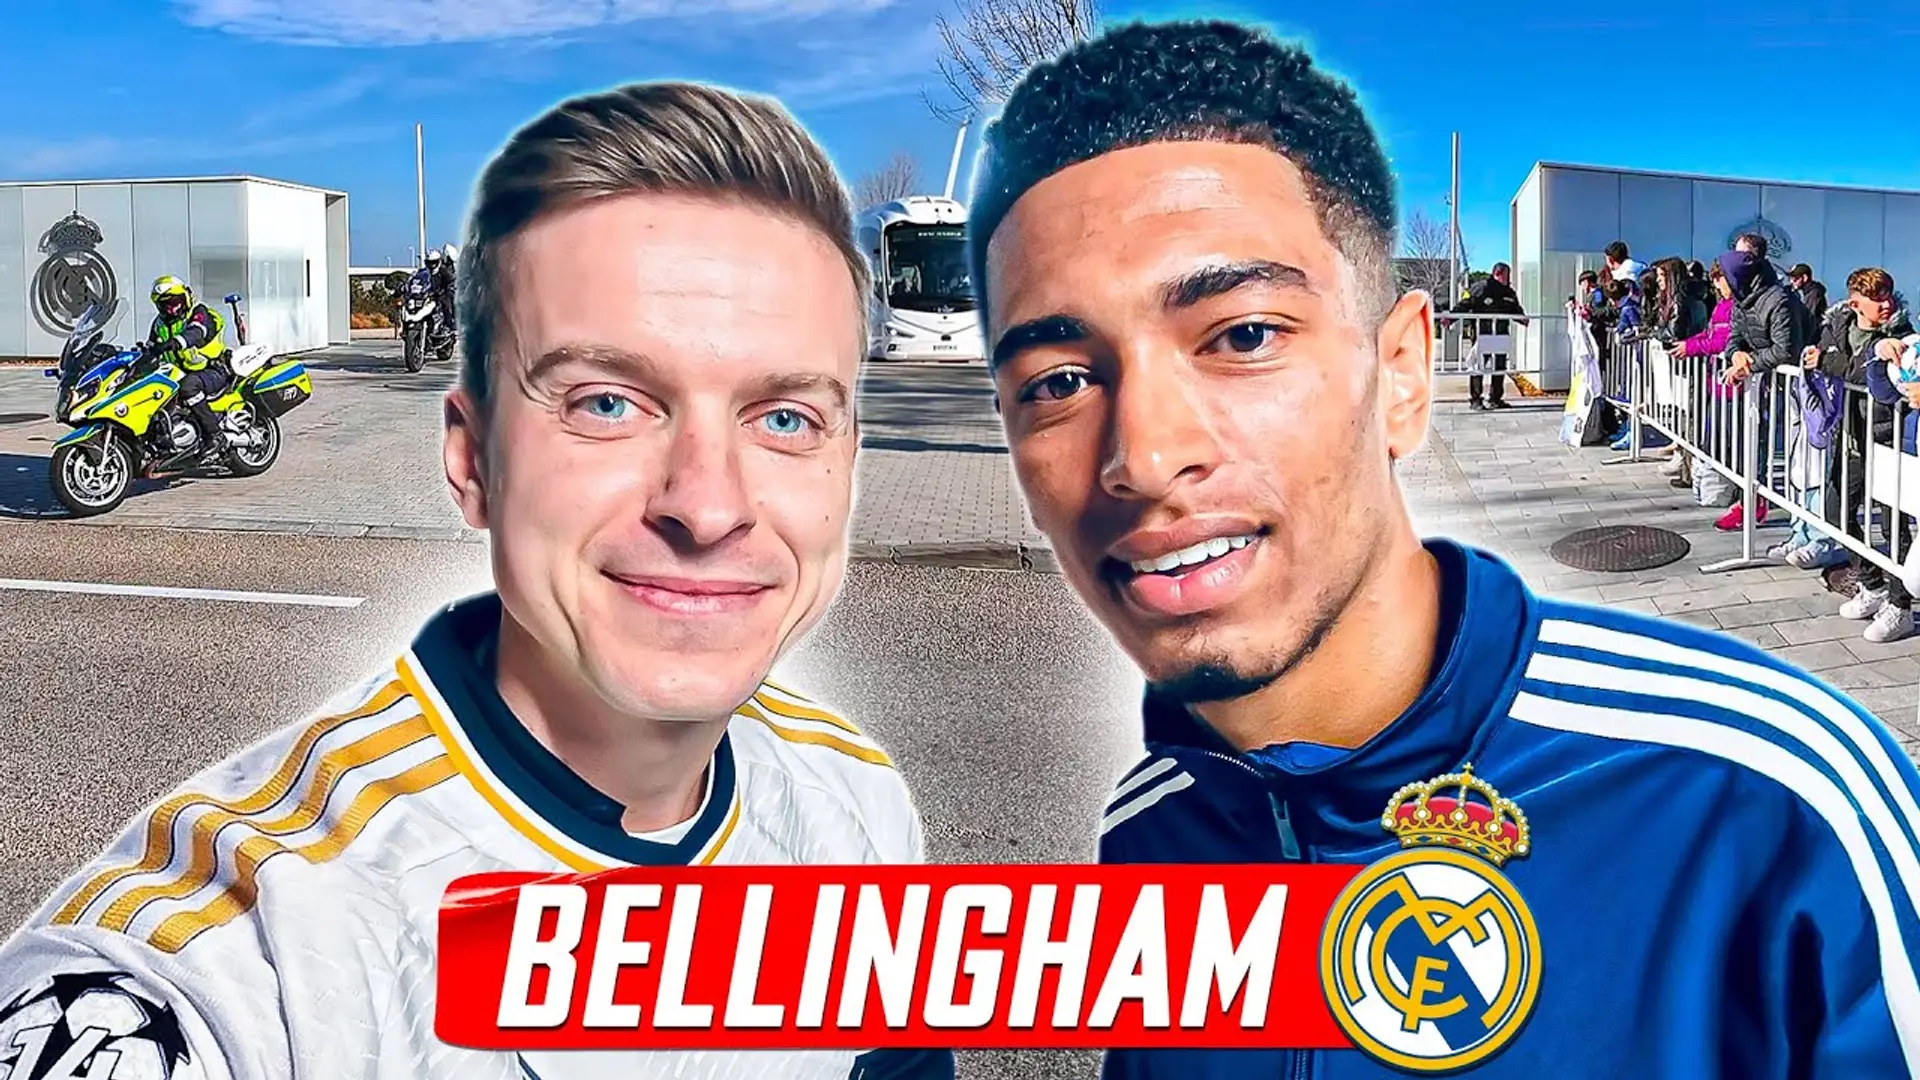 🔥🤩 BELLINGHAM — how to get an autograph from a Real Madrid star (video)